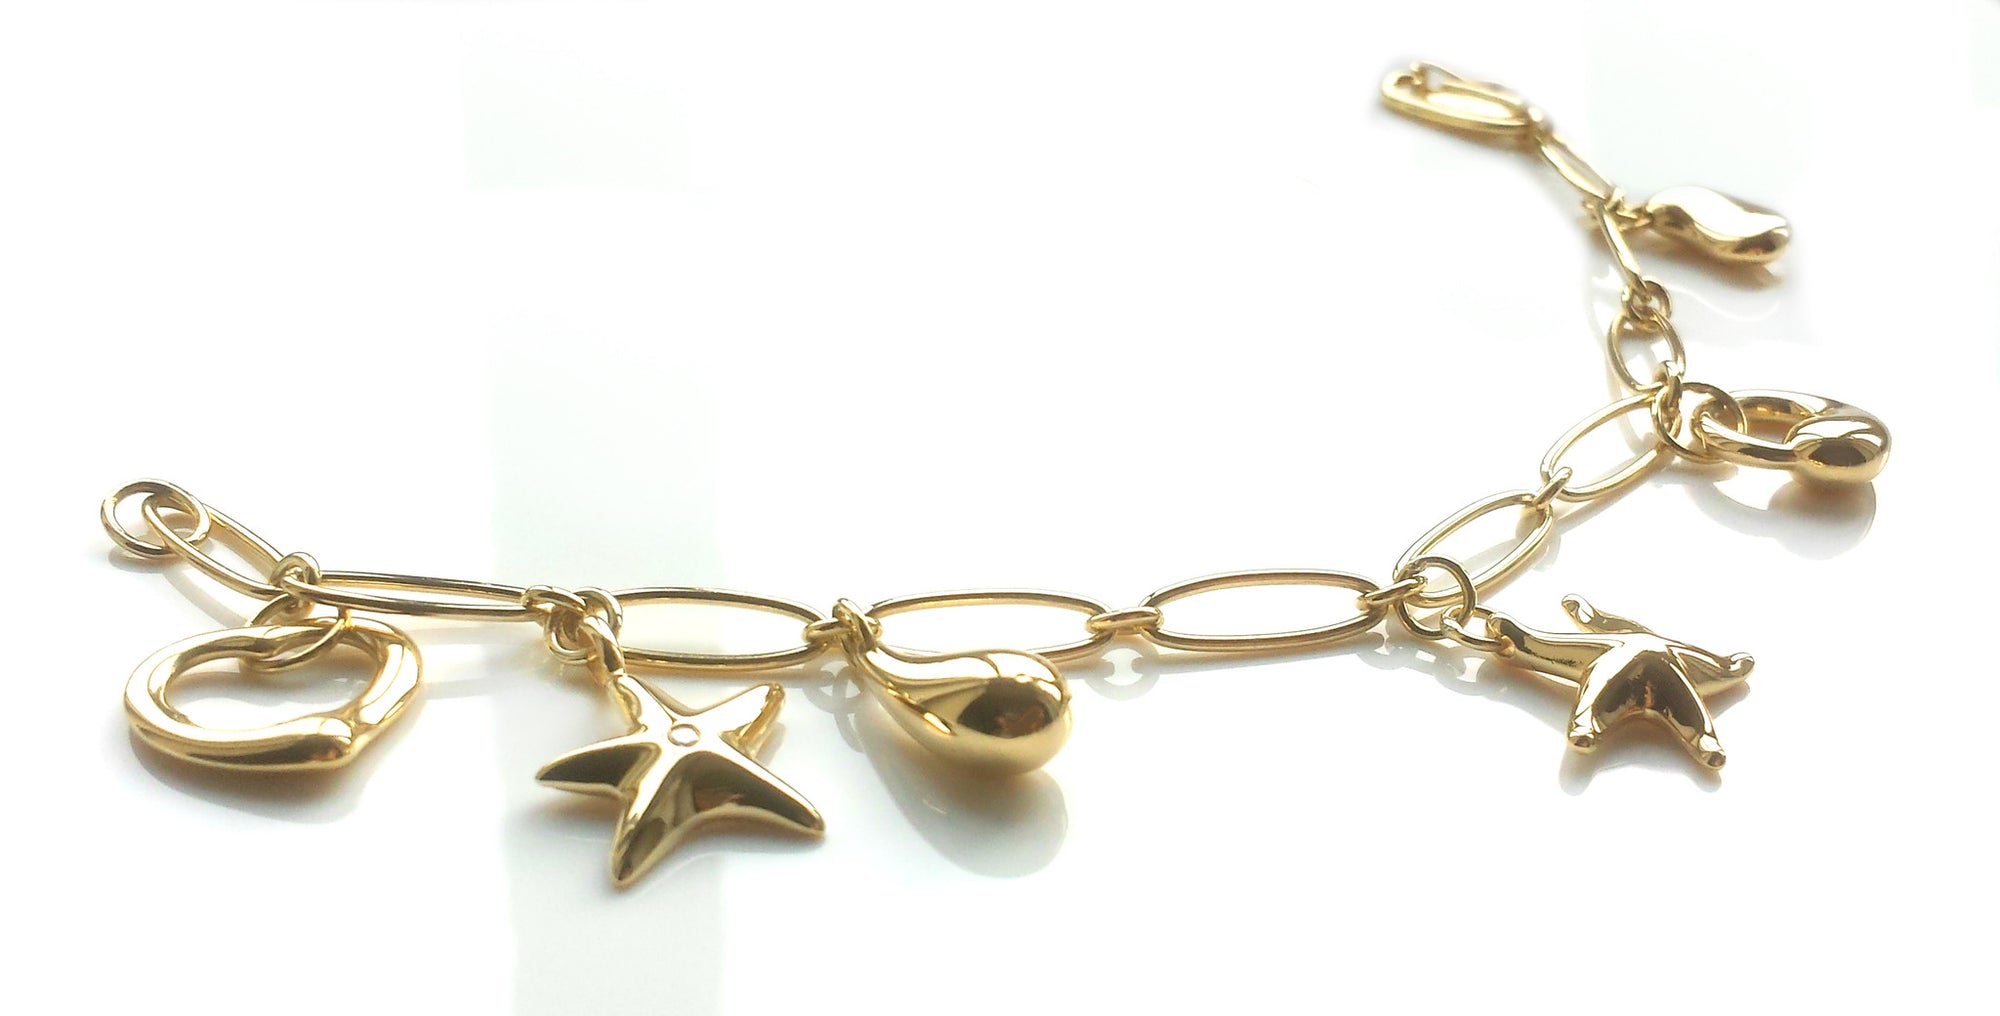 Tiffany & Co. Charm Bracelet by Elsa Peretti in 18k Gold – with Extra Charm